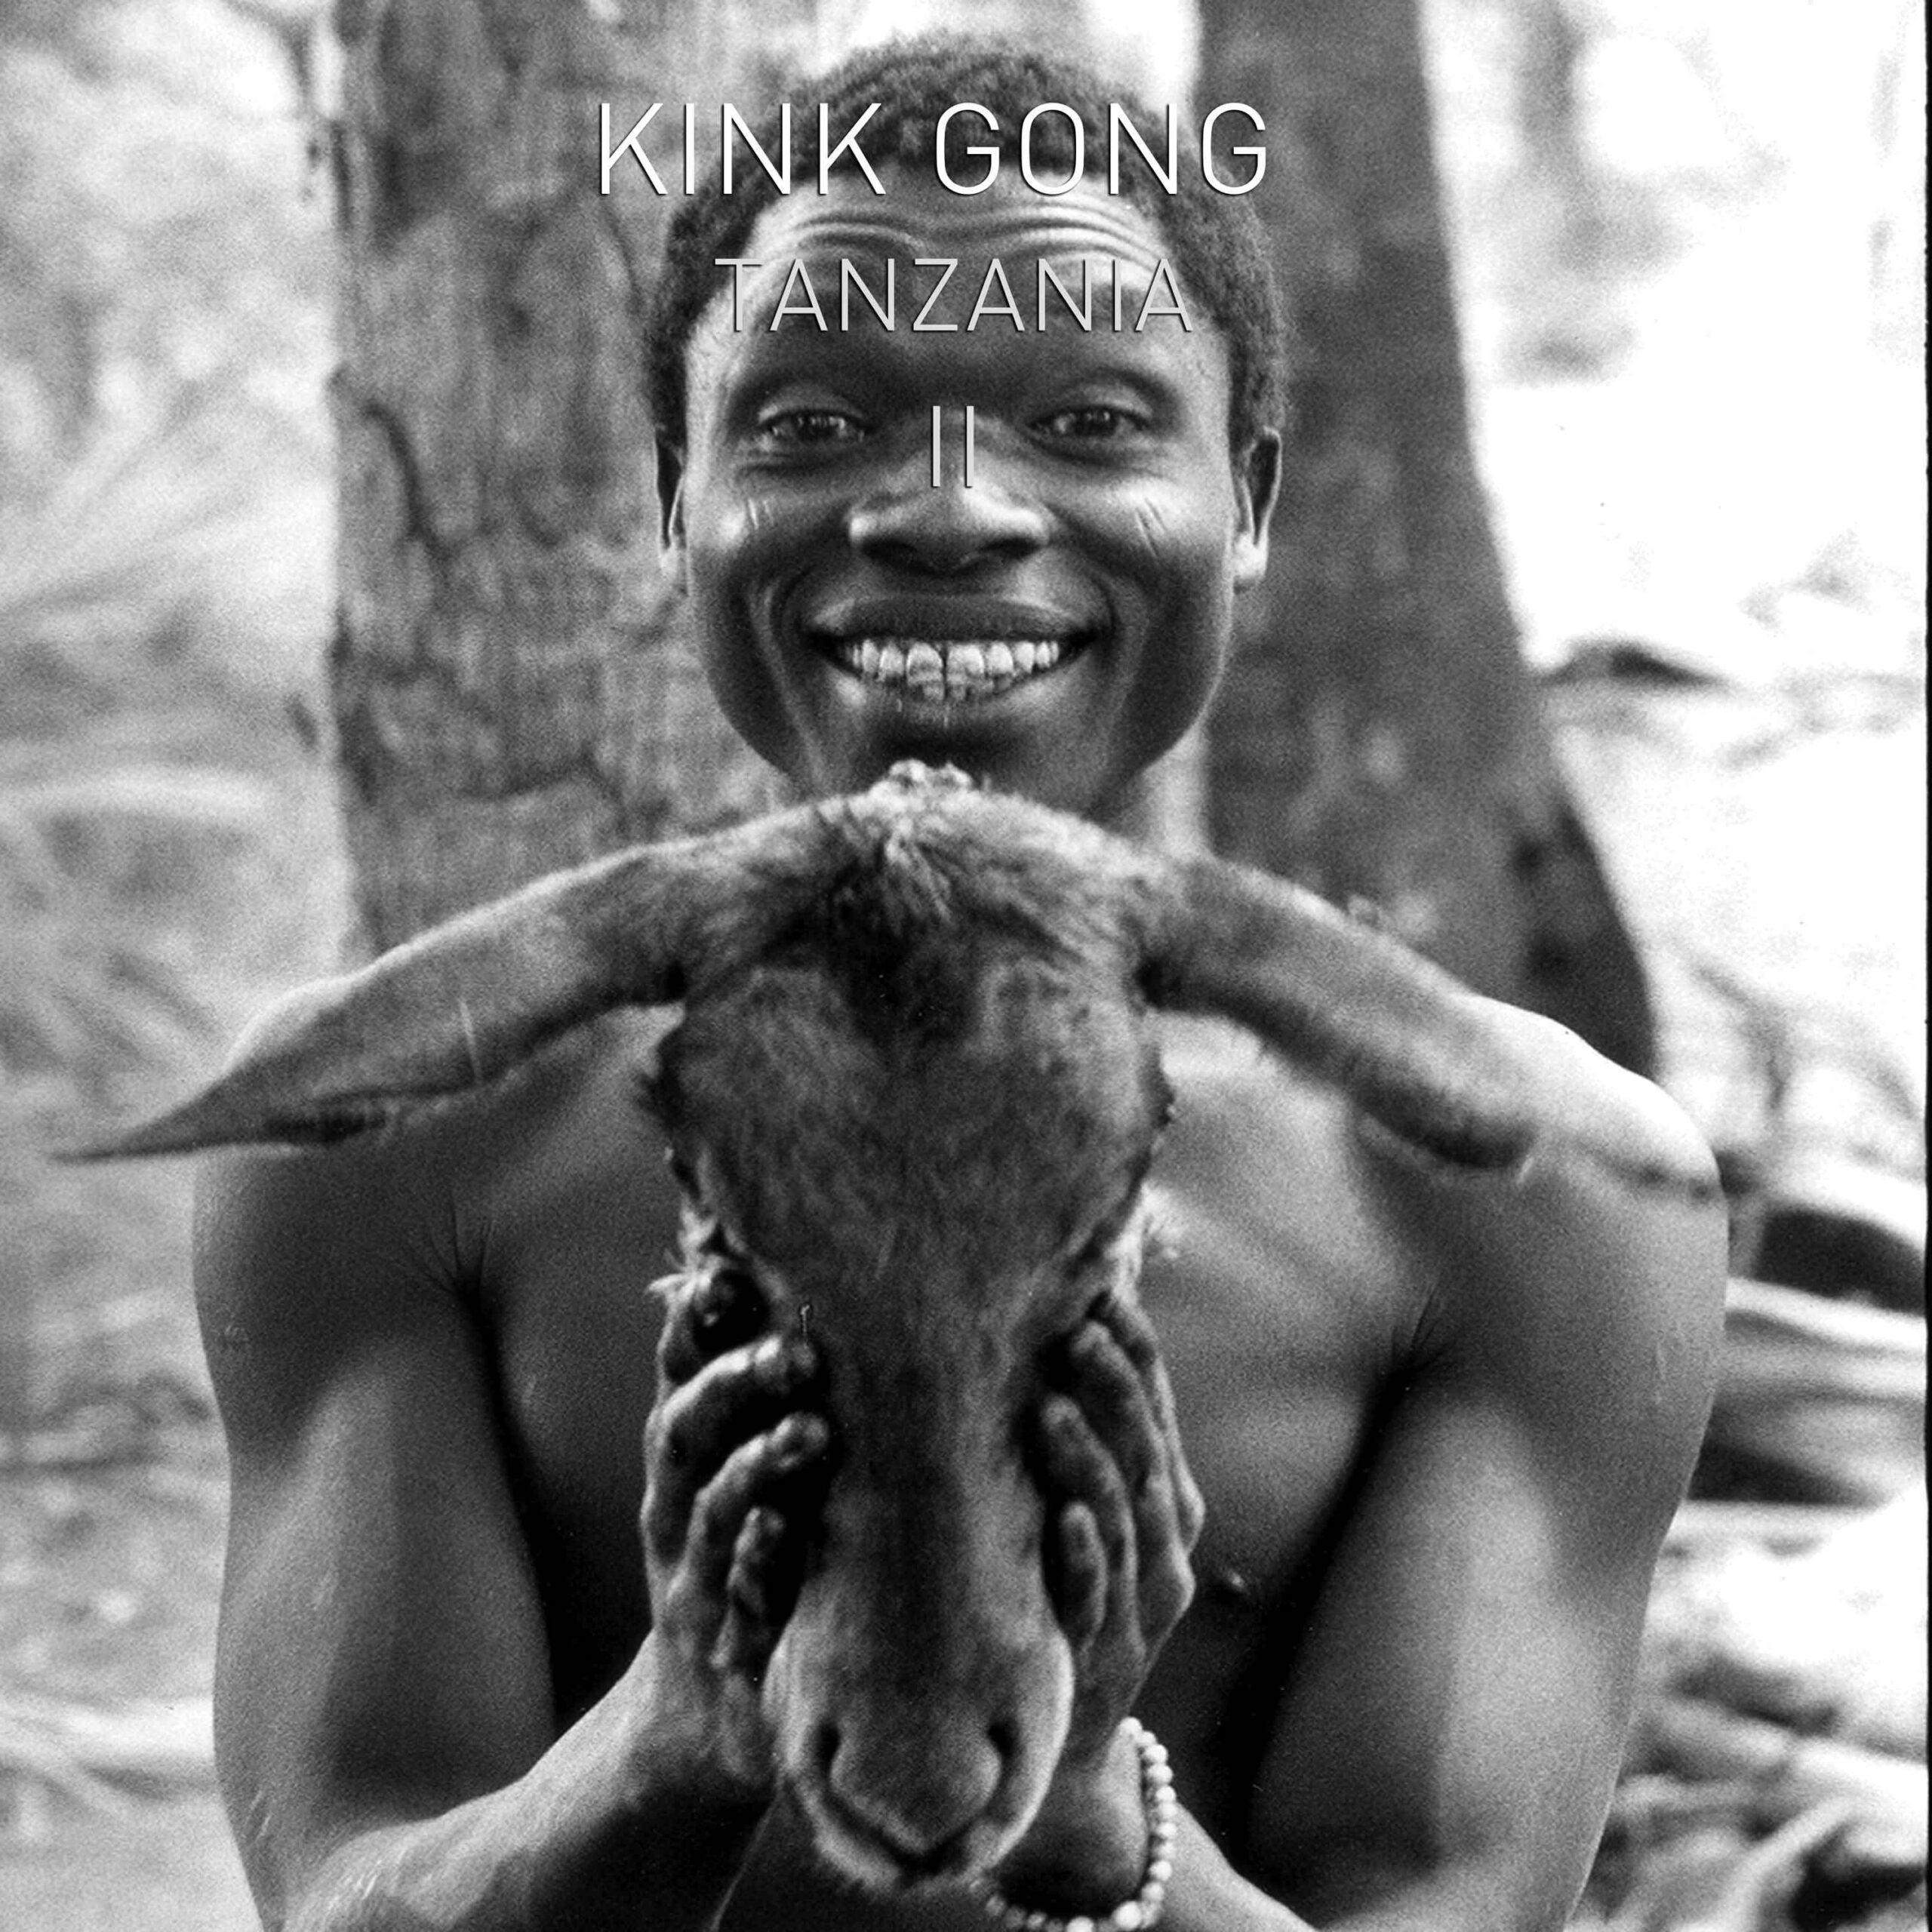 Kink Gong Tanzania 2 uabab picture